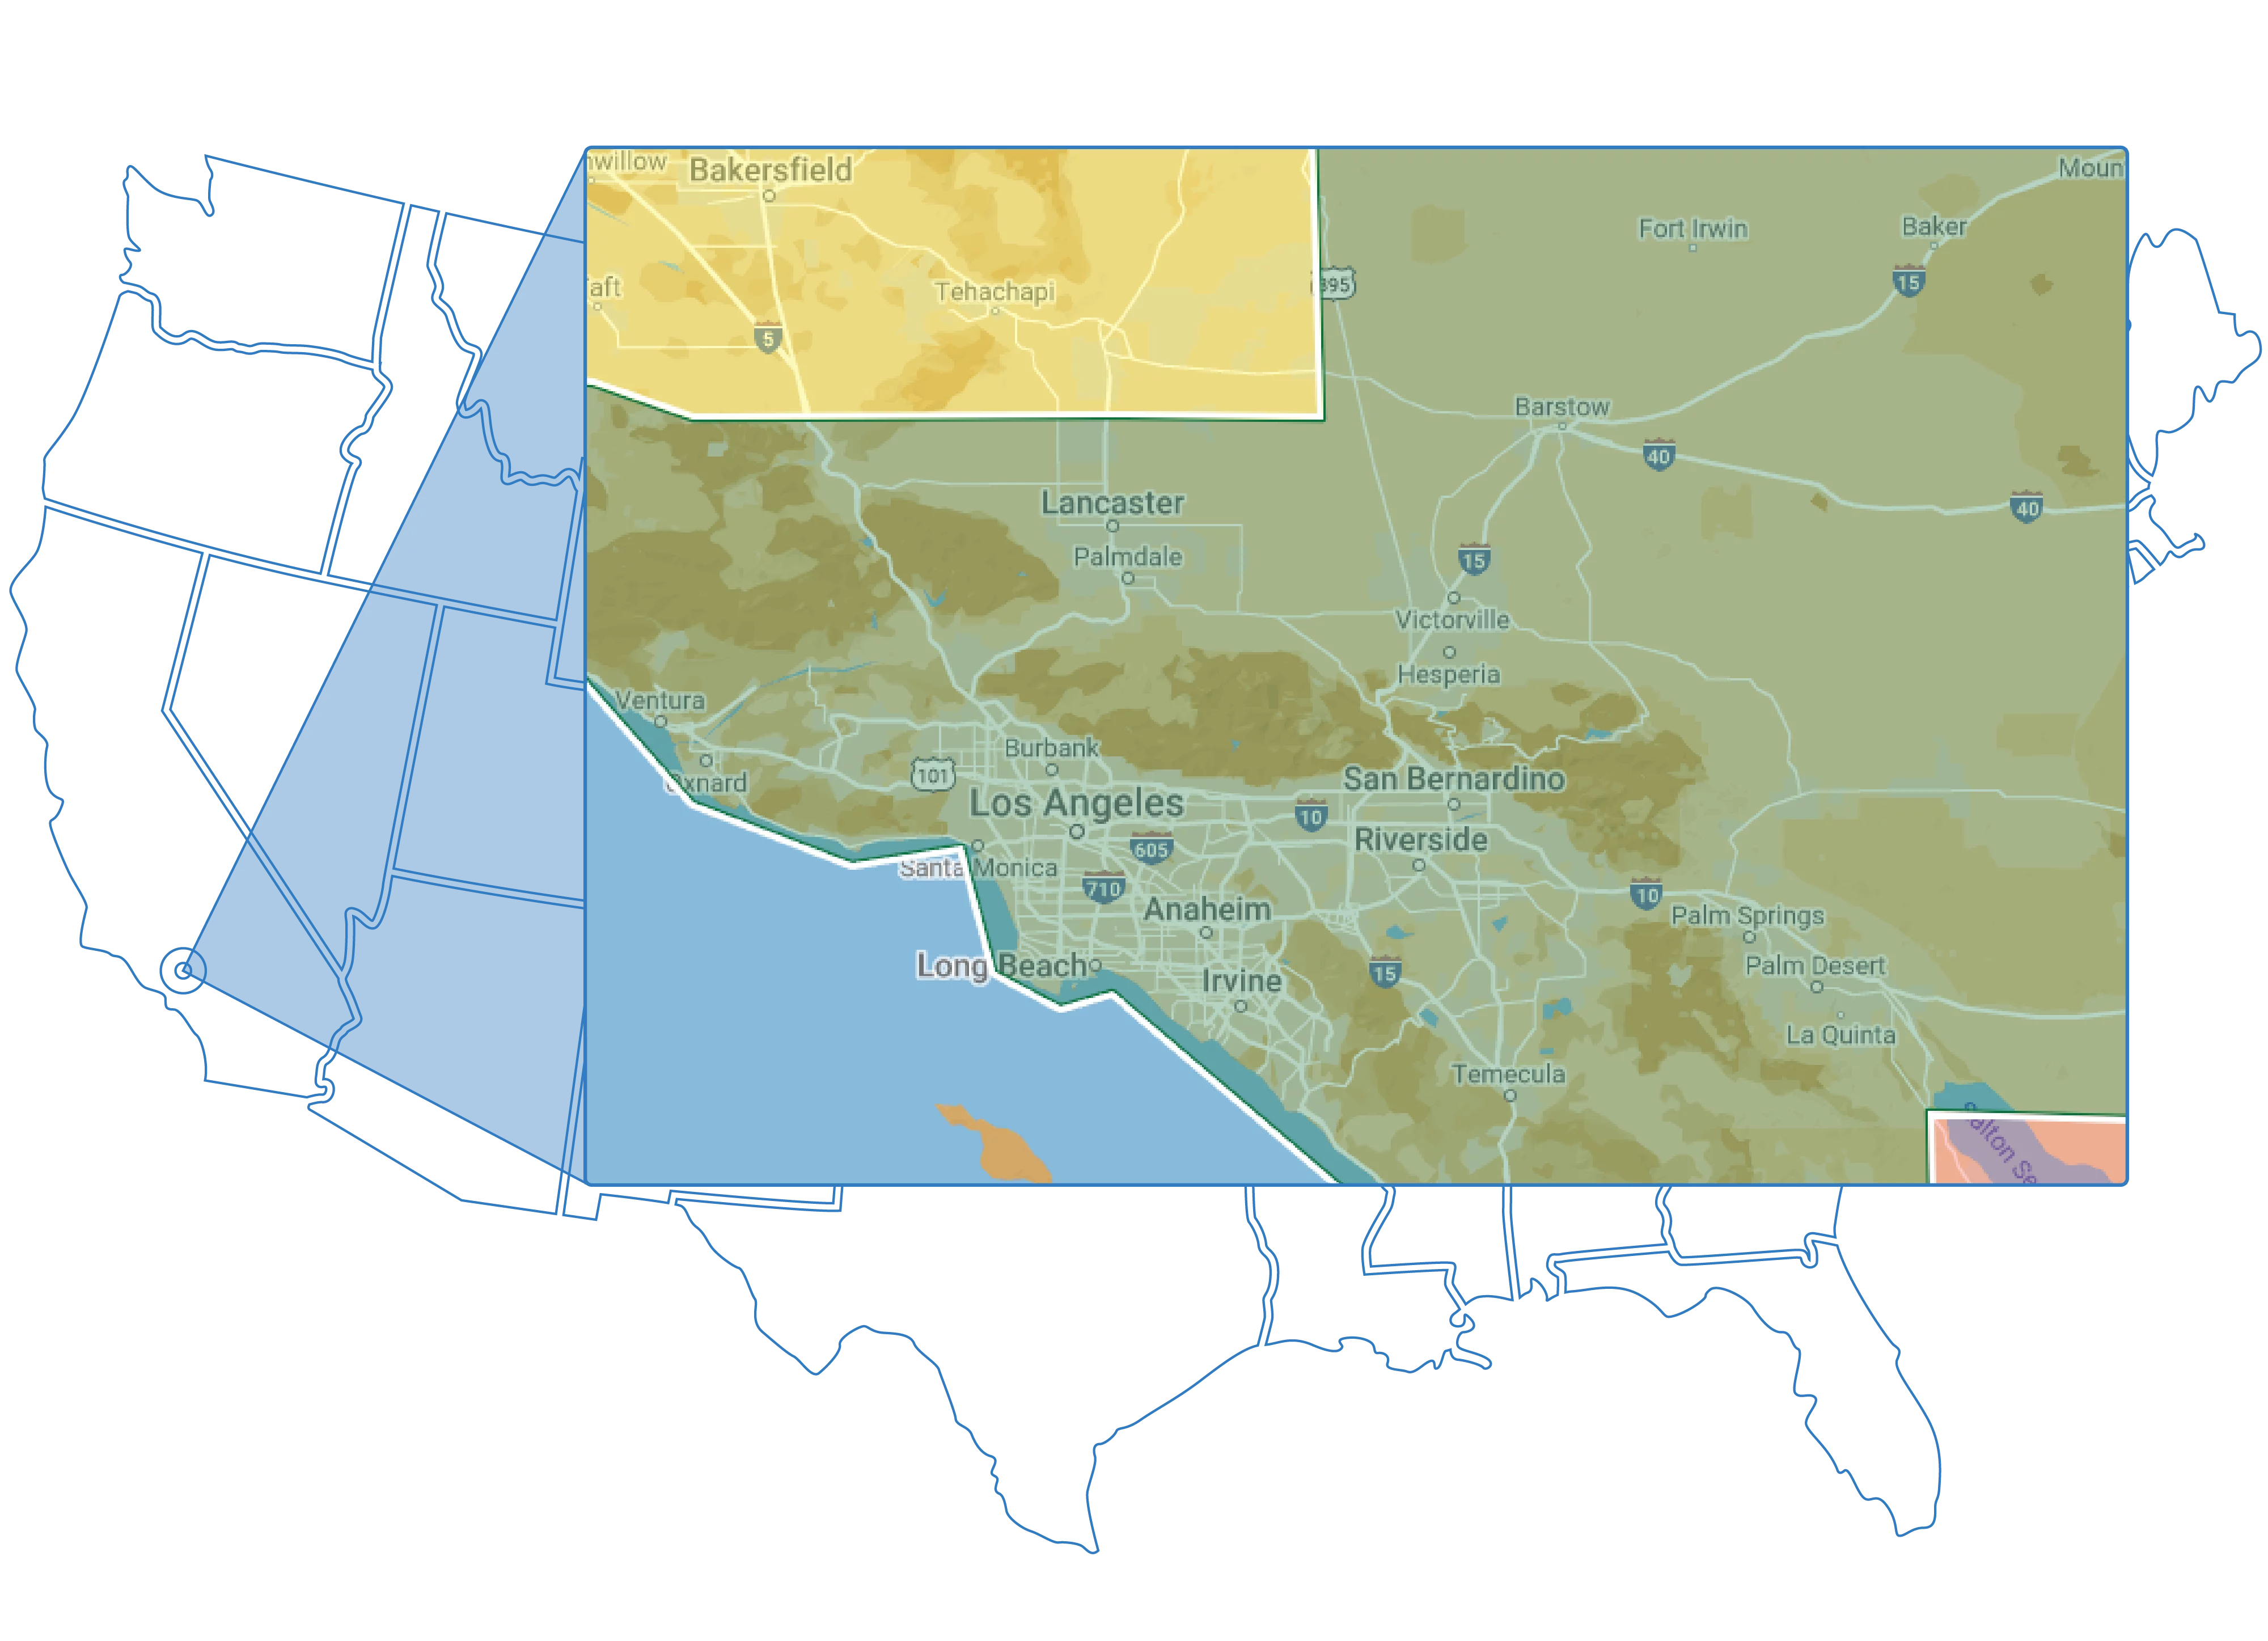 Los Angeles and greater Southern California is among the highest-income regions in the U.S. You would have to head northeast to Bakersfield or south all the way to the Mexican border at Calexico to find incomes and prices similar to averages in more affordable states.